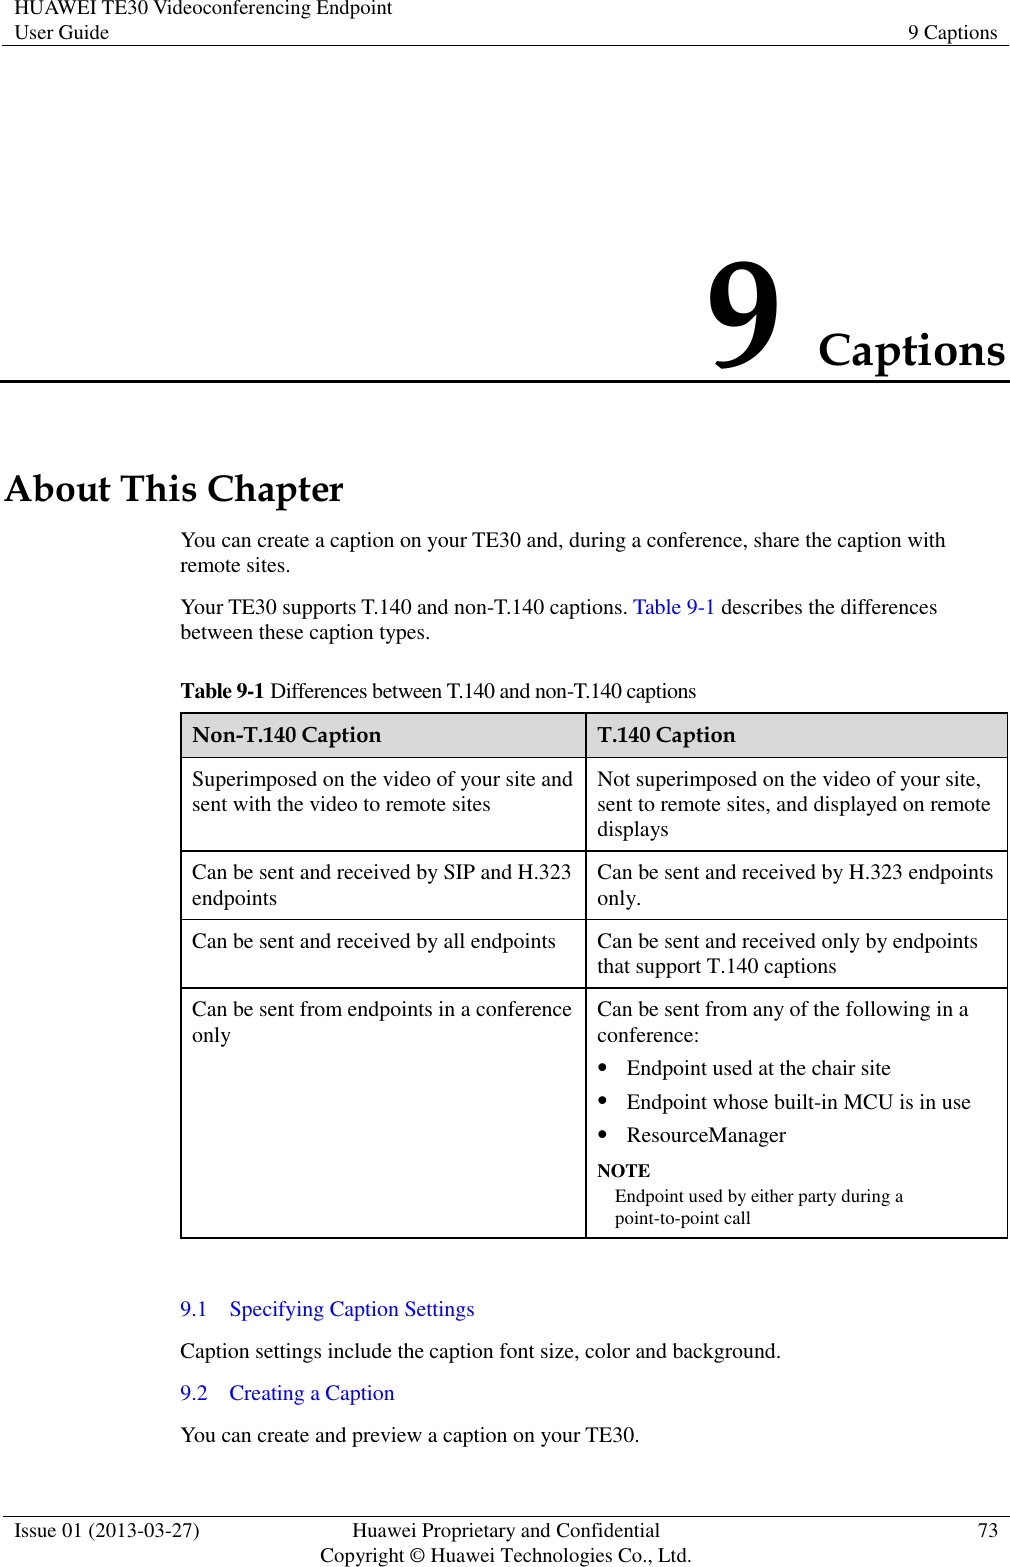 HUAWEI TE30 Videoconferencing Endpoint User Guide 9 Captions  Issue 01 (2013-03-27) Huawei Proprietary and Confidential                                     Copyright © Huawei Technologies Co., Ltd. 73  9 Captions About This Chapter You can create a caption on your TE30 and, during a conference, share the caption with remote sites. Your TE30 supports T.140 and non-T.140 captions. Table 9-1 describes the differences between these caption types. Table 9-1 Differences between T.140 and non-T.140 captions Non-T.140 Caption T.140 Caption Superimposed on the video of your site and sent with the video to remote sites Not superimposed on the video of your site, sent to remote sites, and displayed on remote displays Can be sent and received by SIP and H.323 endpoints Can be sent and received by H.323 endpoints only. Can be sent and received by all endpoints Can be sent and received only by endpoints that support T.140 captions Can be sent from endpoints in a conference only Can be sent from any of the following in a conference:  Endpoint used at the chair site  Endpoint whose built-in MCU is in use  ResourceManager NOTE Endpoint used by either party during a point-to-point call  9.1    Specifying Caption Settings Caption settings include the caption font size, color and background. 9.2    Creating a Caption You can create and preview a caption on your TE30. 